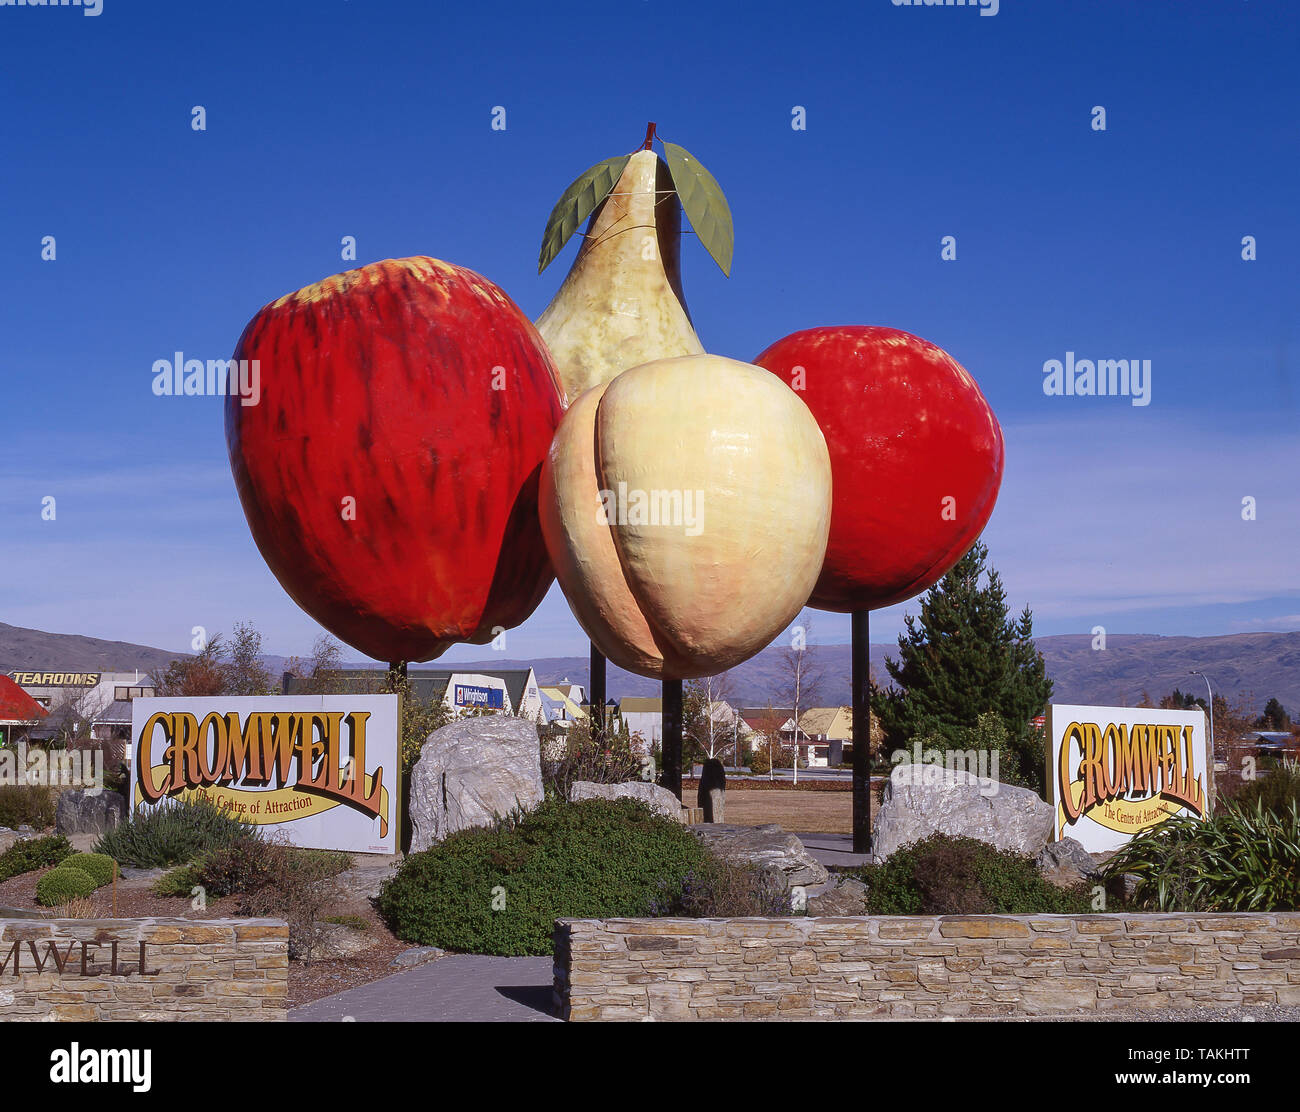 Giant fruit sculpture and welcome sign, Cromwell, Otago Region, South Island, New Zealand Stock Photo